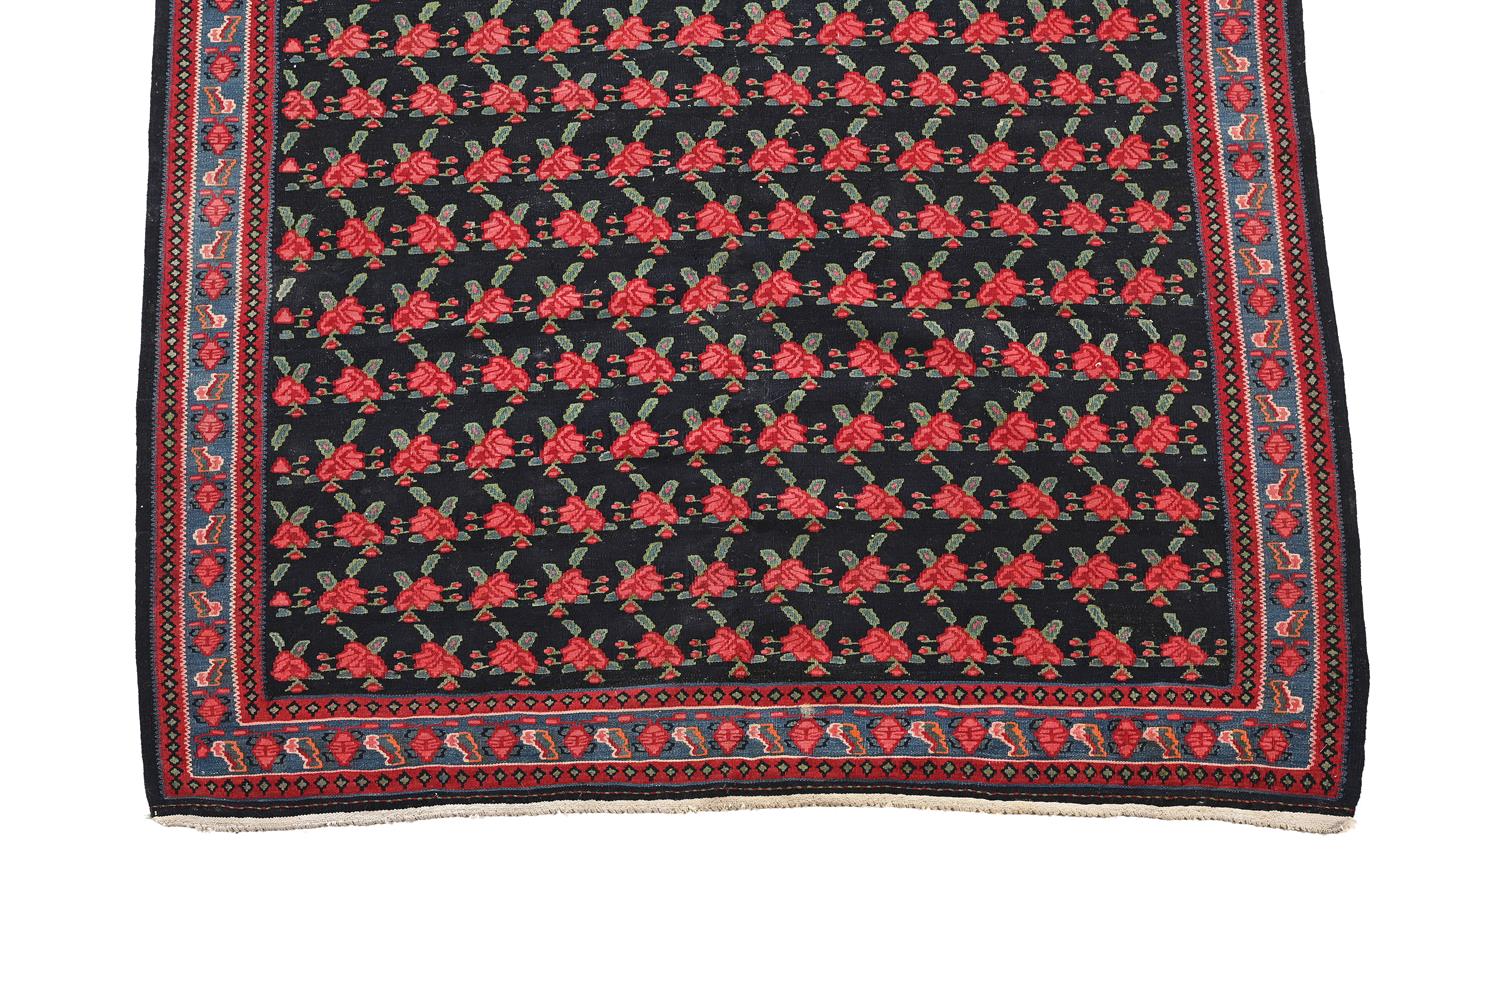 A SENNEH KILIM RUG, approximately 229 x 136cm - Image 2 of 3